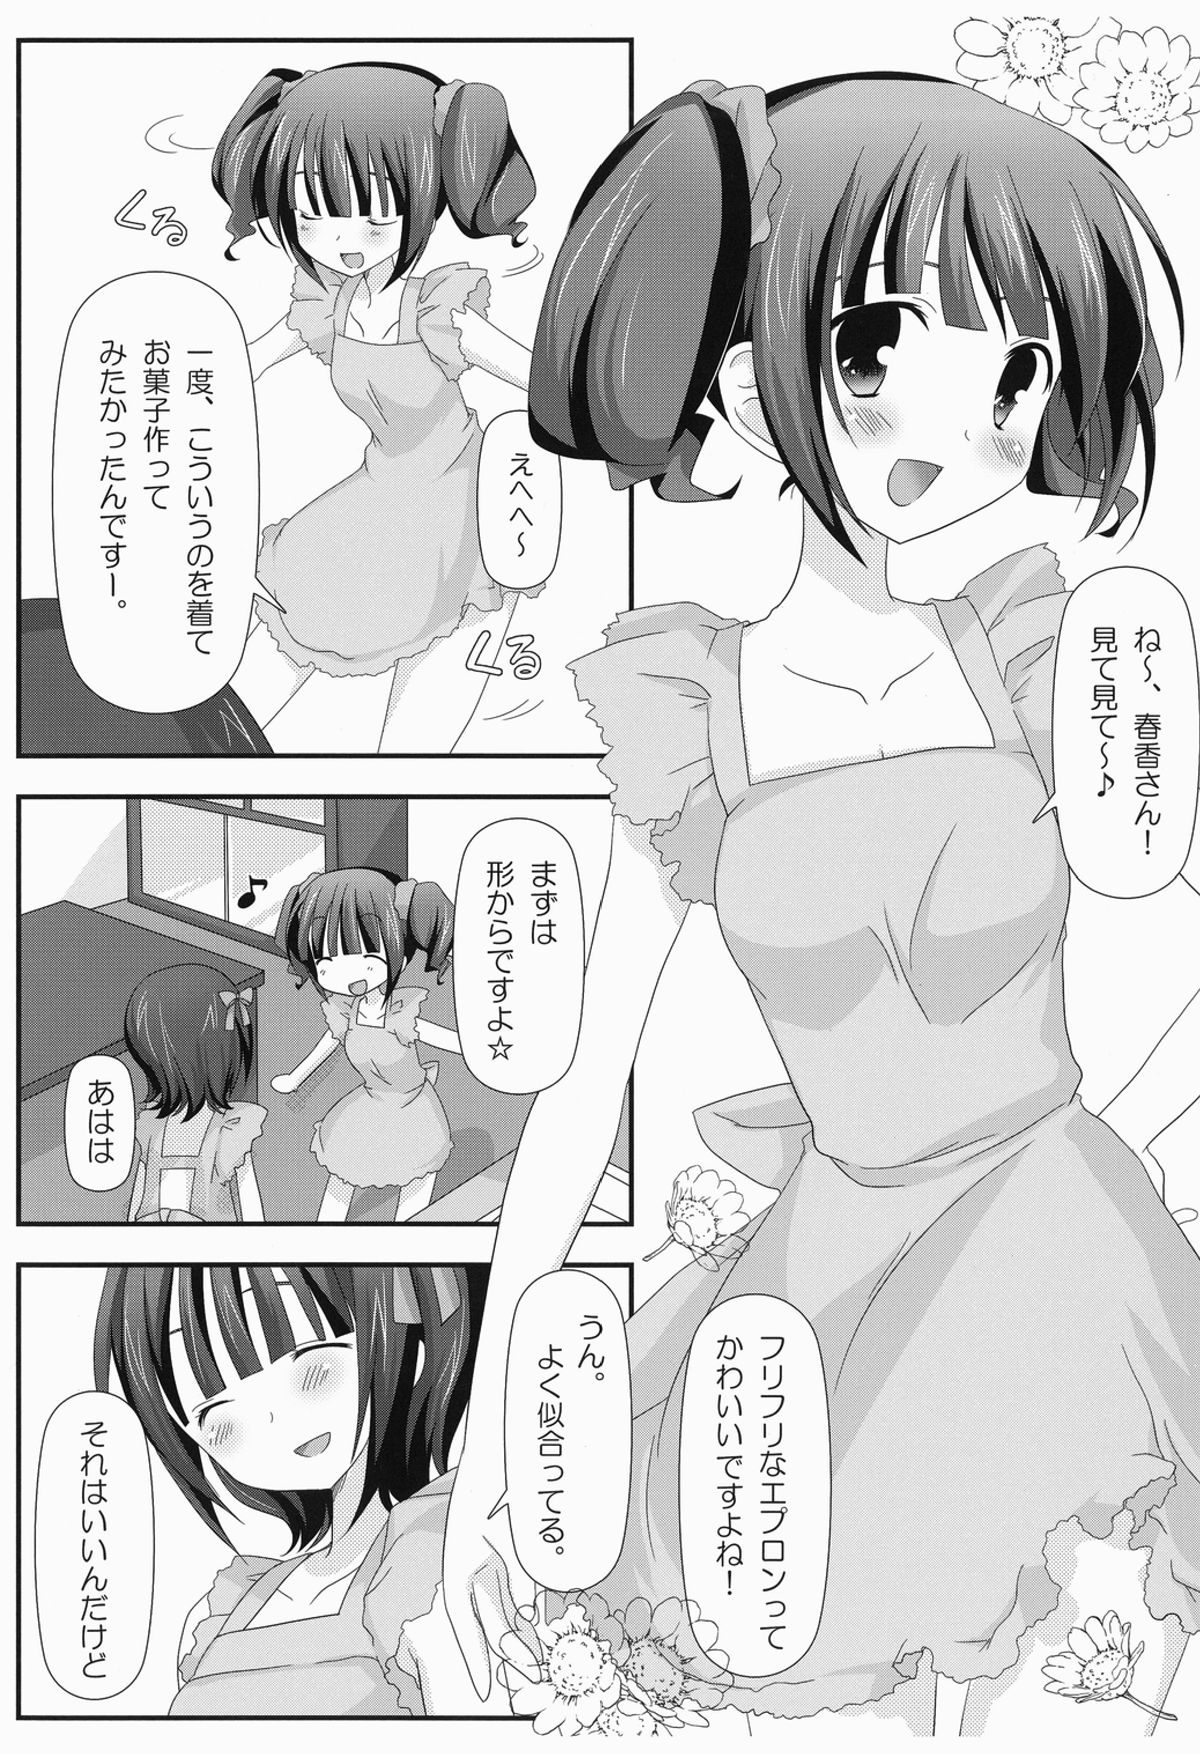 (C76) [Momo9 (Shiratama)] Sparkling Sweet! (THE iDOLM@STER) page 3 full